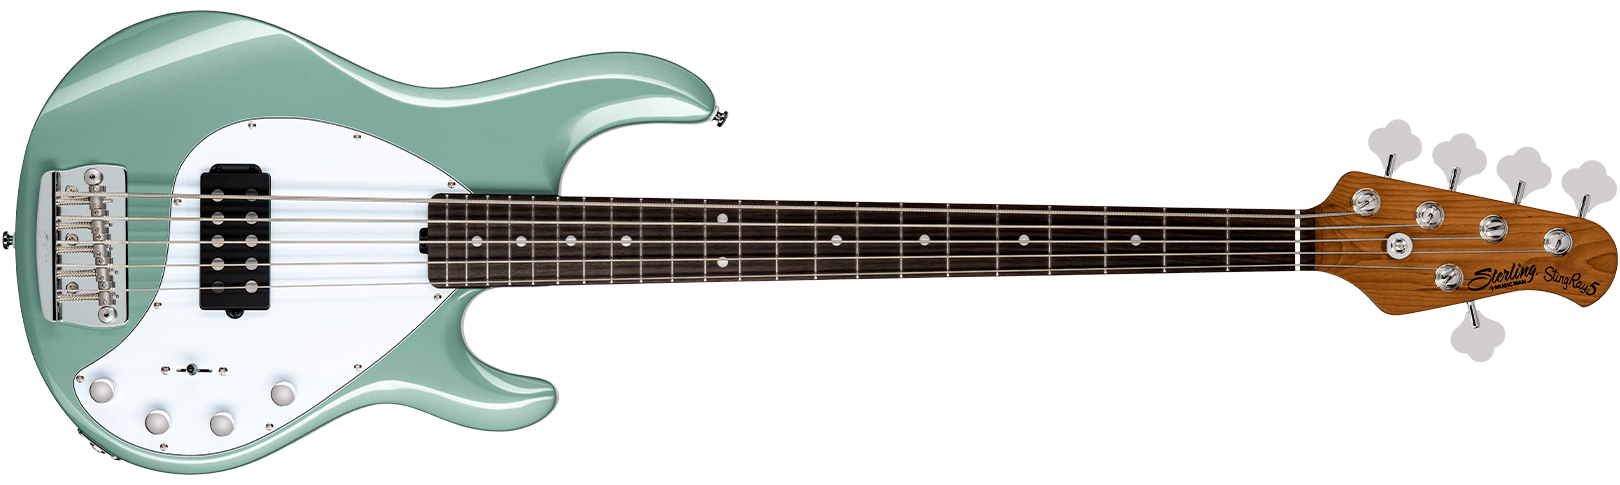 The StingRay Ray35 bass in Dorado Green front details.